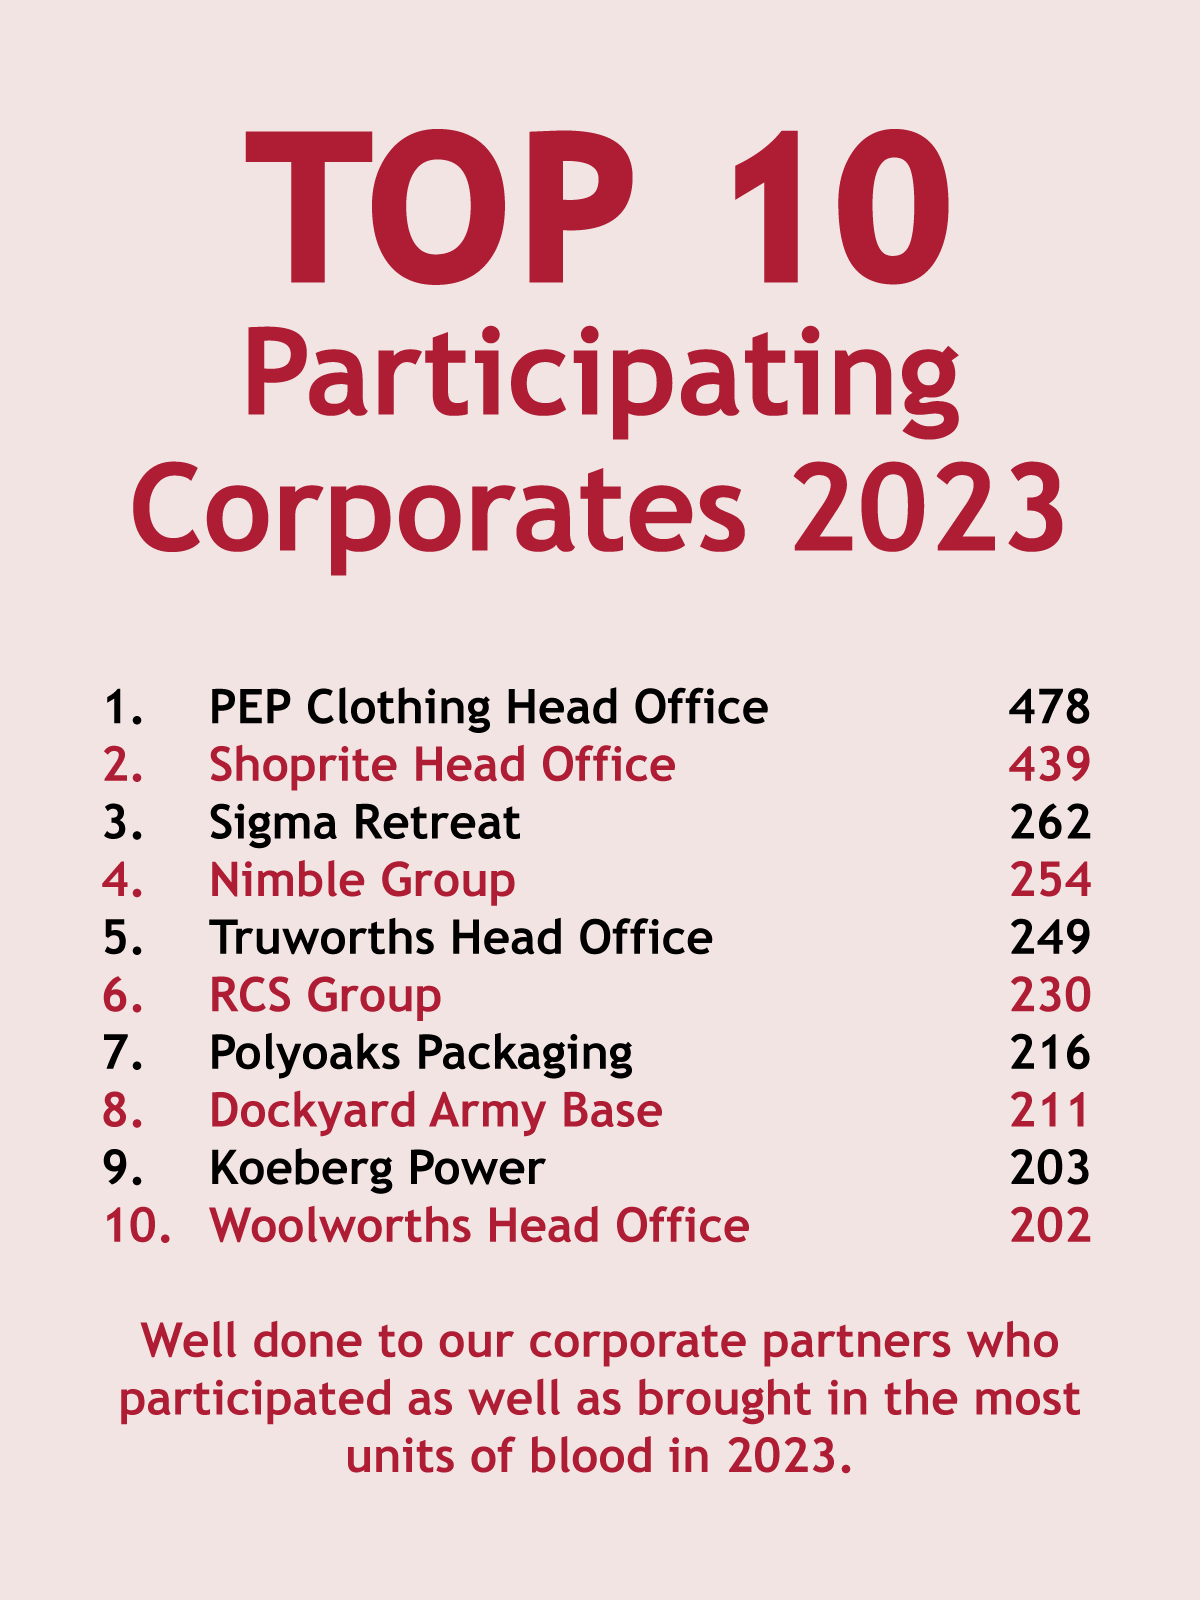 Top 10 Participating Corporates 2023 1. PEP Clothing Head Office 478 2. Shoprite Head Office 439 3. Sigma Retreat 262 4. Nimble Group 254 5. Truworths Head Office 249 6. RCS Group 230 7. Polyoaks Packaging 216 8. Dockyard Army Base 211 9. Koeberg Power 203 10. Woolworths Head Office 202 Well done to our corporate partners who participated as well as brought in the most units of blood in 2023.